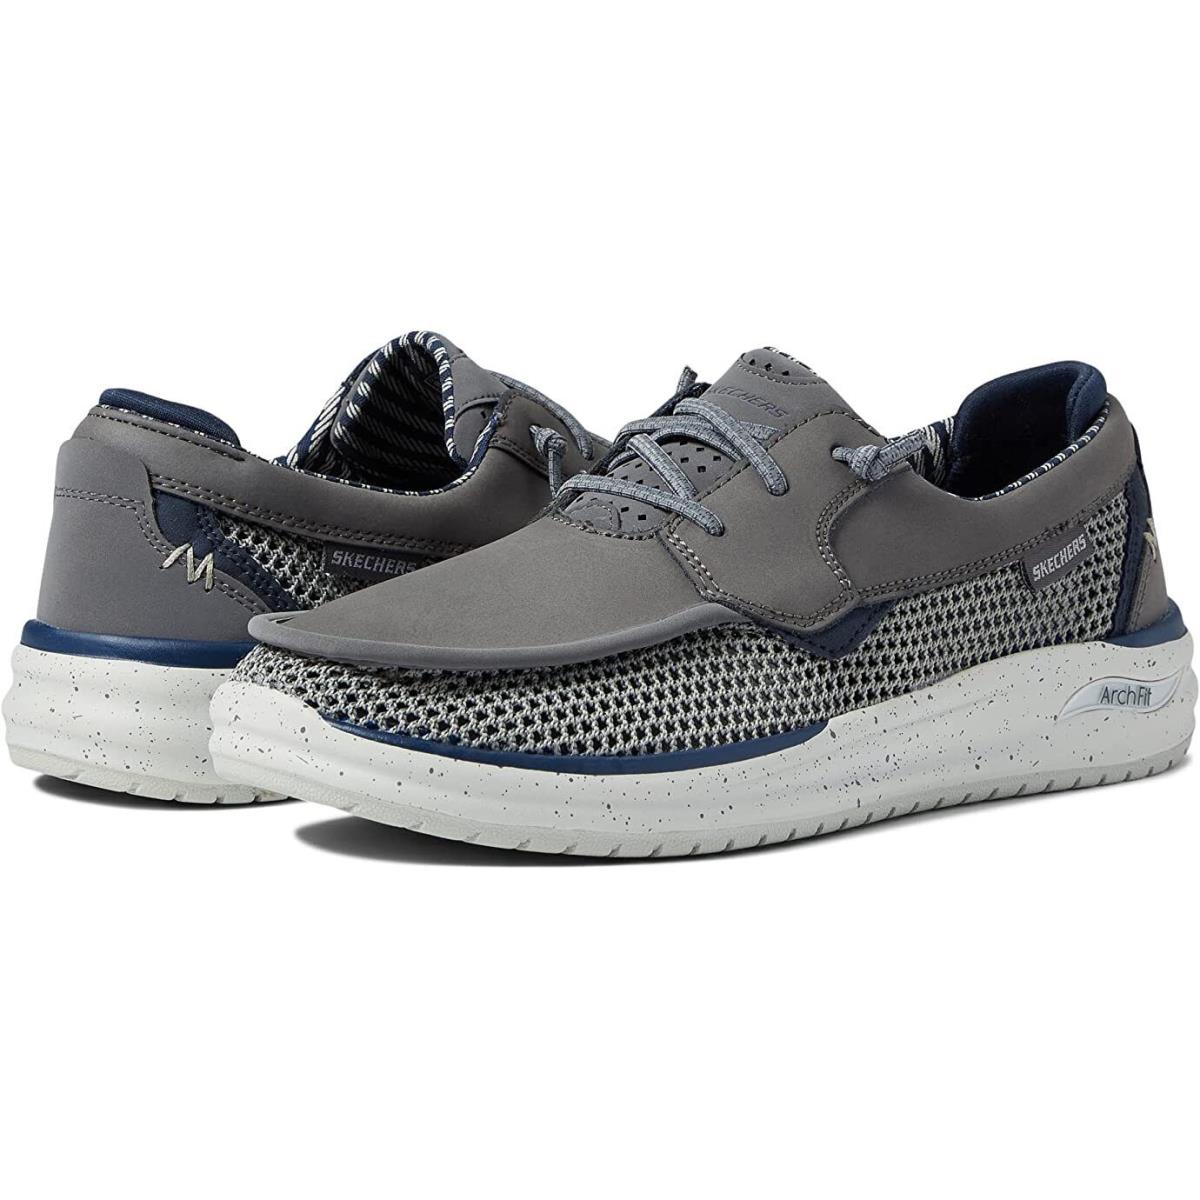 Men`s Skechers Arch Fit Melo Waymer Arch Boat 204589 /char Multi Sizes Charcoal - Charcoal